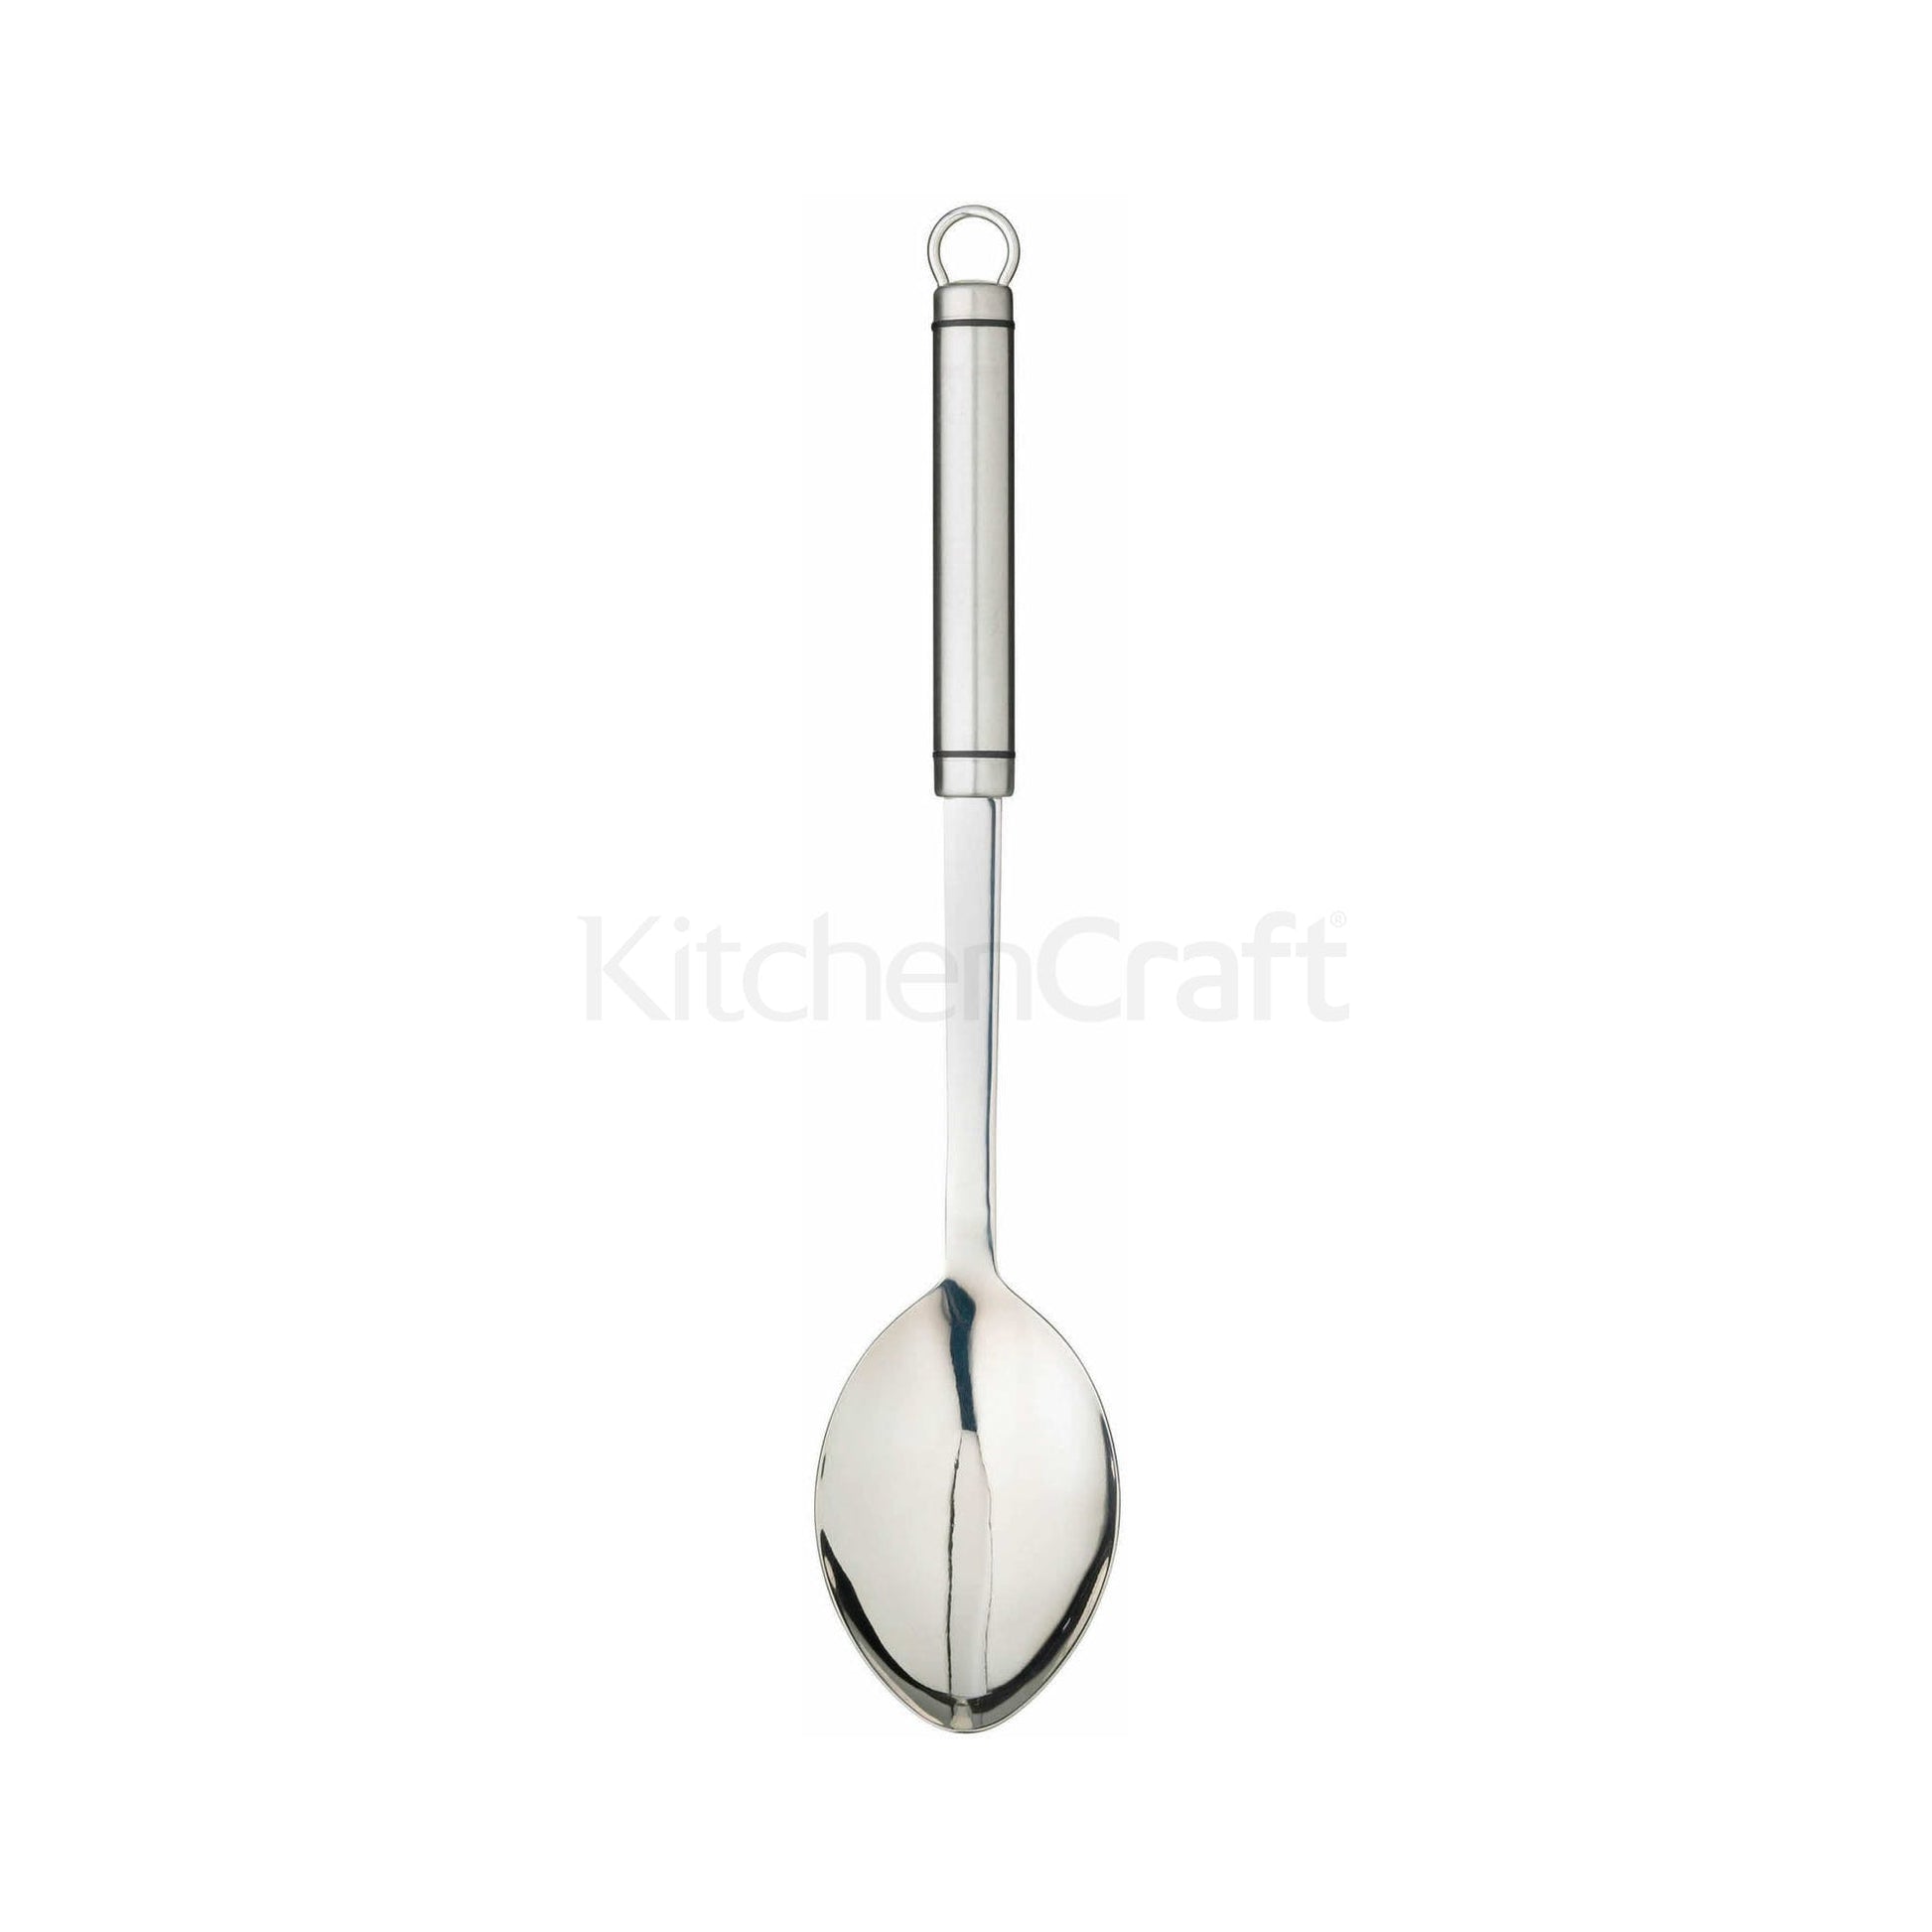 KitchenCraft Stainless Steel Solid Spoon